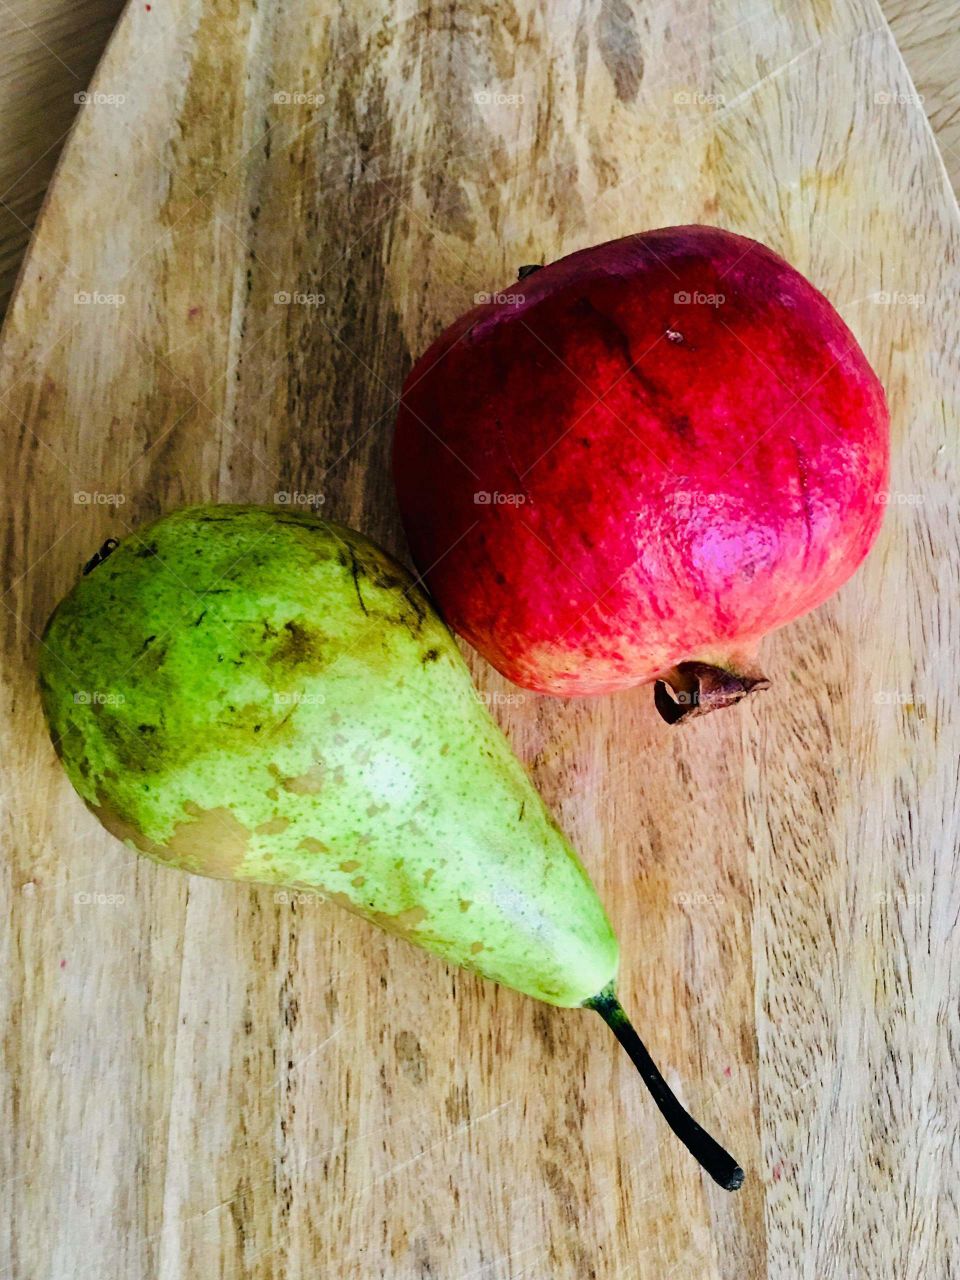 Pear and pomegranate on a wooden background.